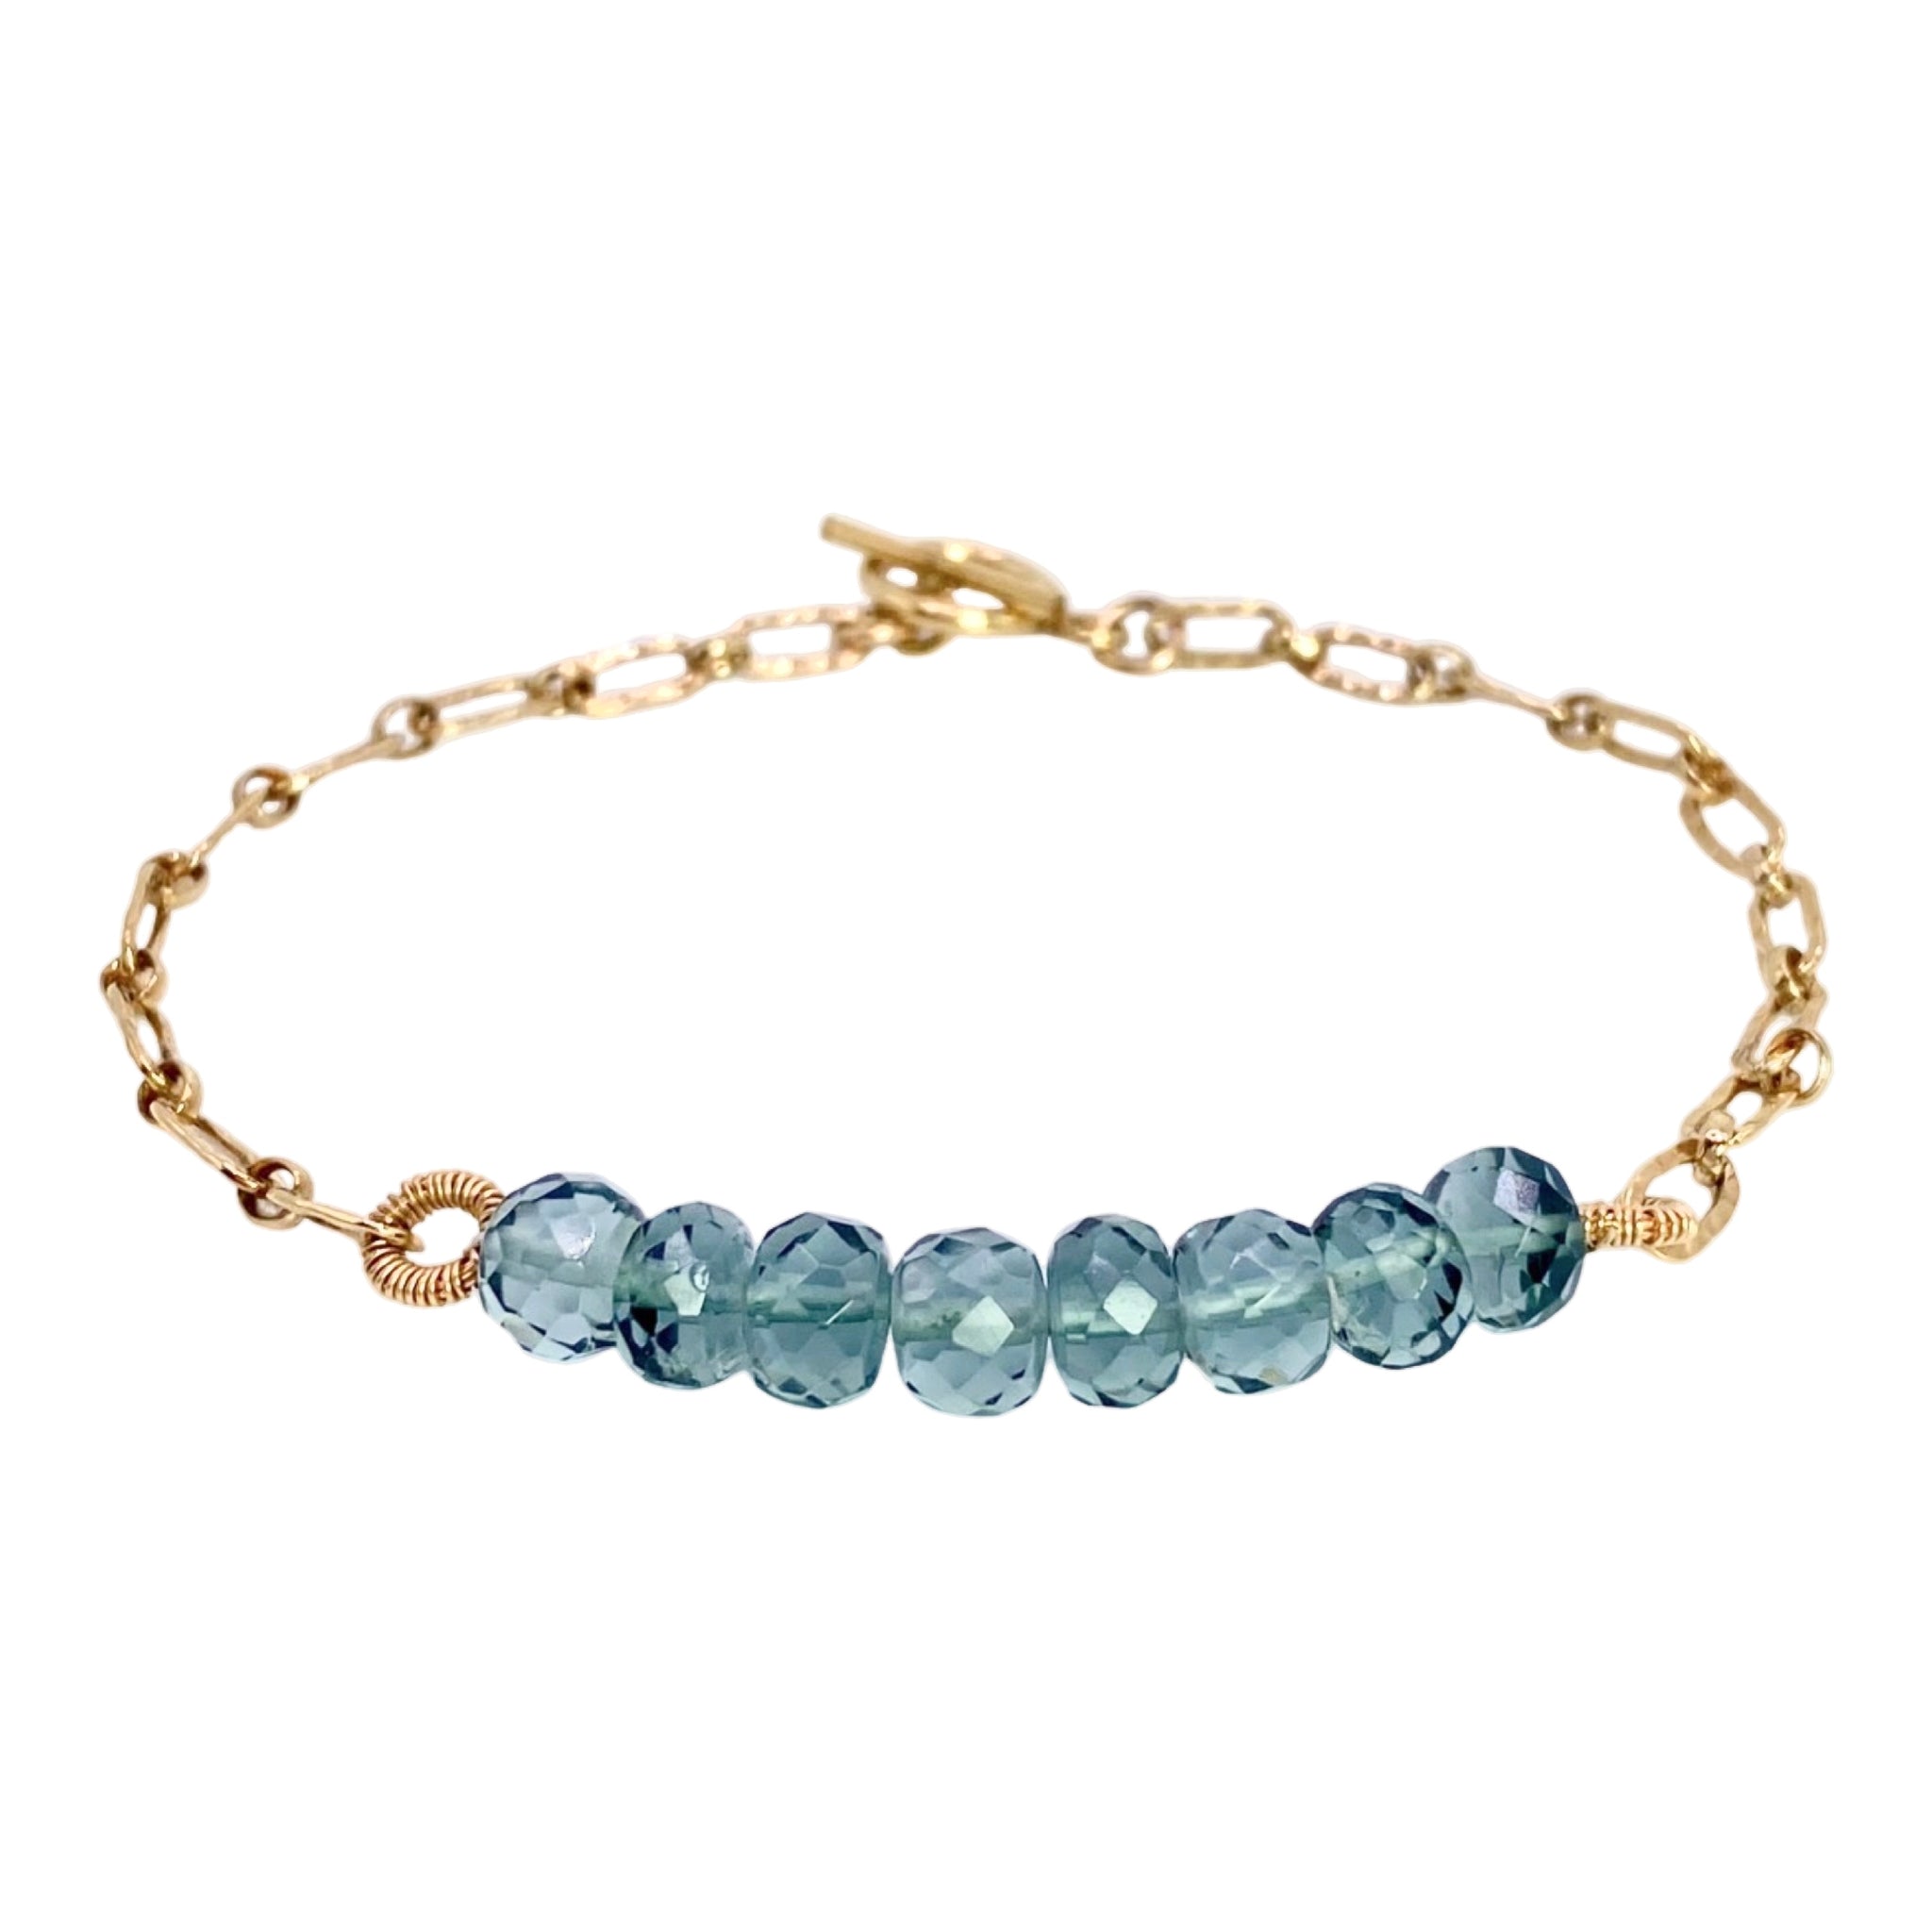 Dana Kellin Quartz Link Bracelet is available at Shaylula Jewlery & Gifts in Tarrytown, NY and online. Soft blue-grey, faceted rondelle quartz beads are mixed with hammered gold links in this fresh, modern, Dana Kellin bracelet. Layer it with more gold link bracelets for an arm party! • 14k gold filled, quartz • 7" L • Toggle clasp